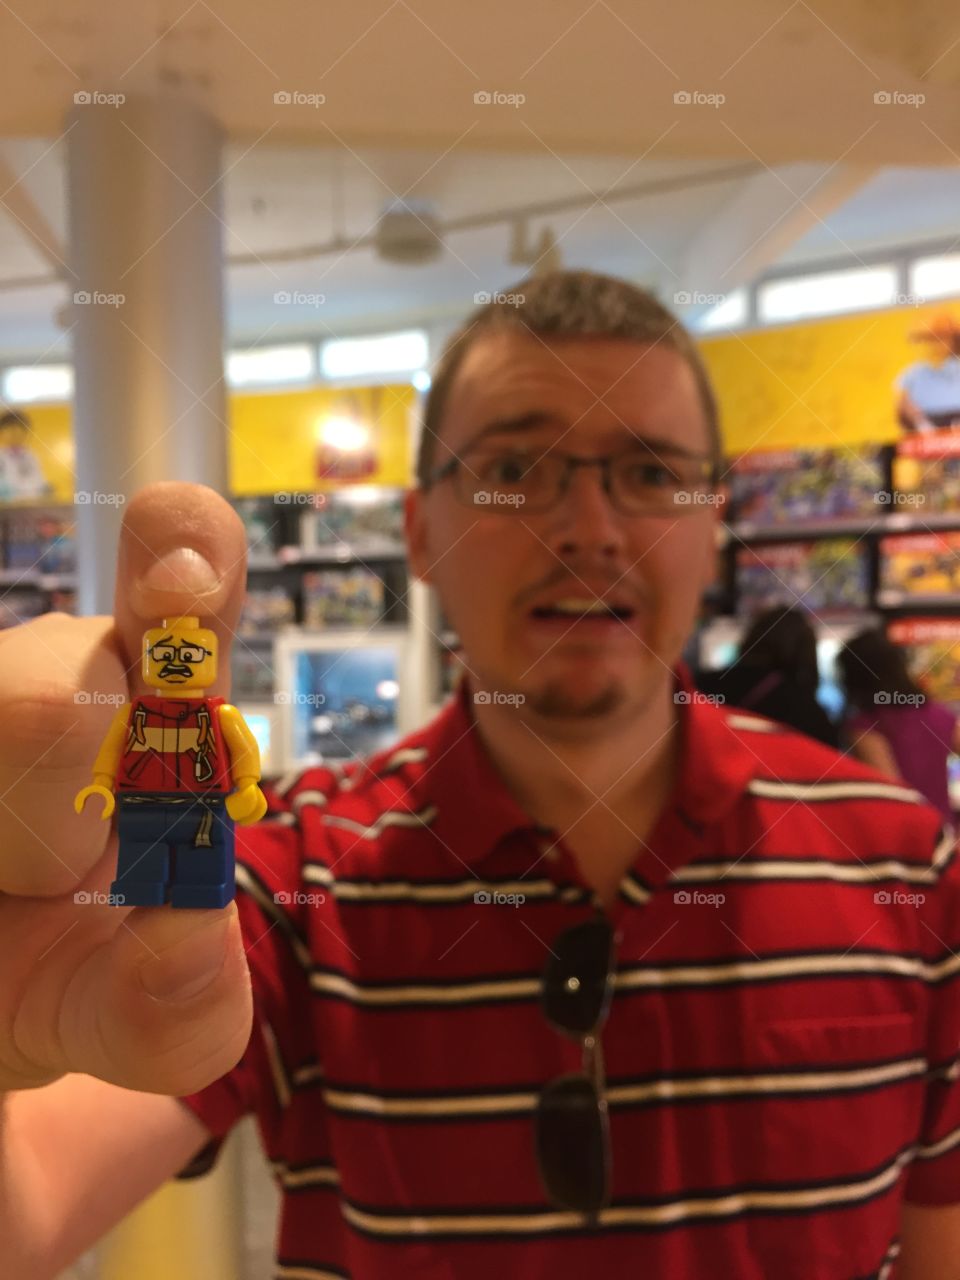 Making a lego mini me at the Disney Springs LEGO store in Florida.